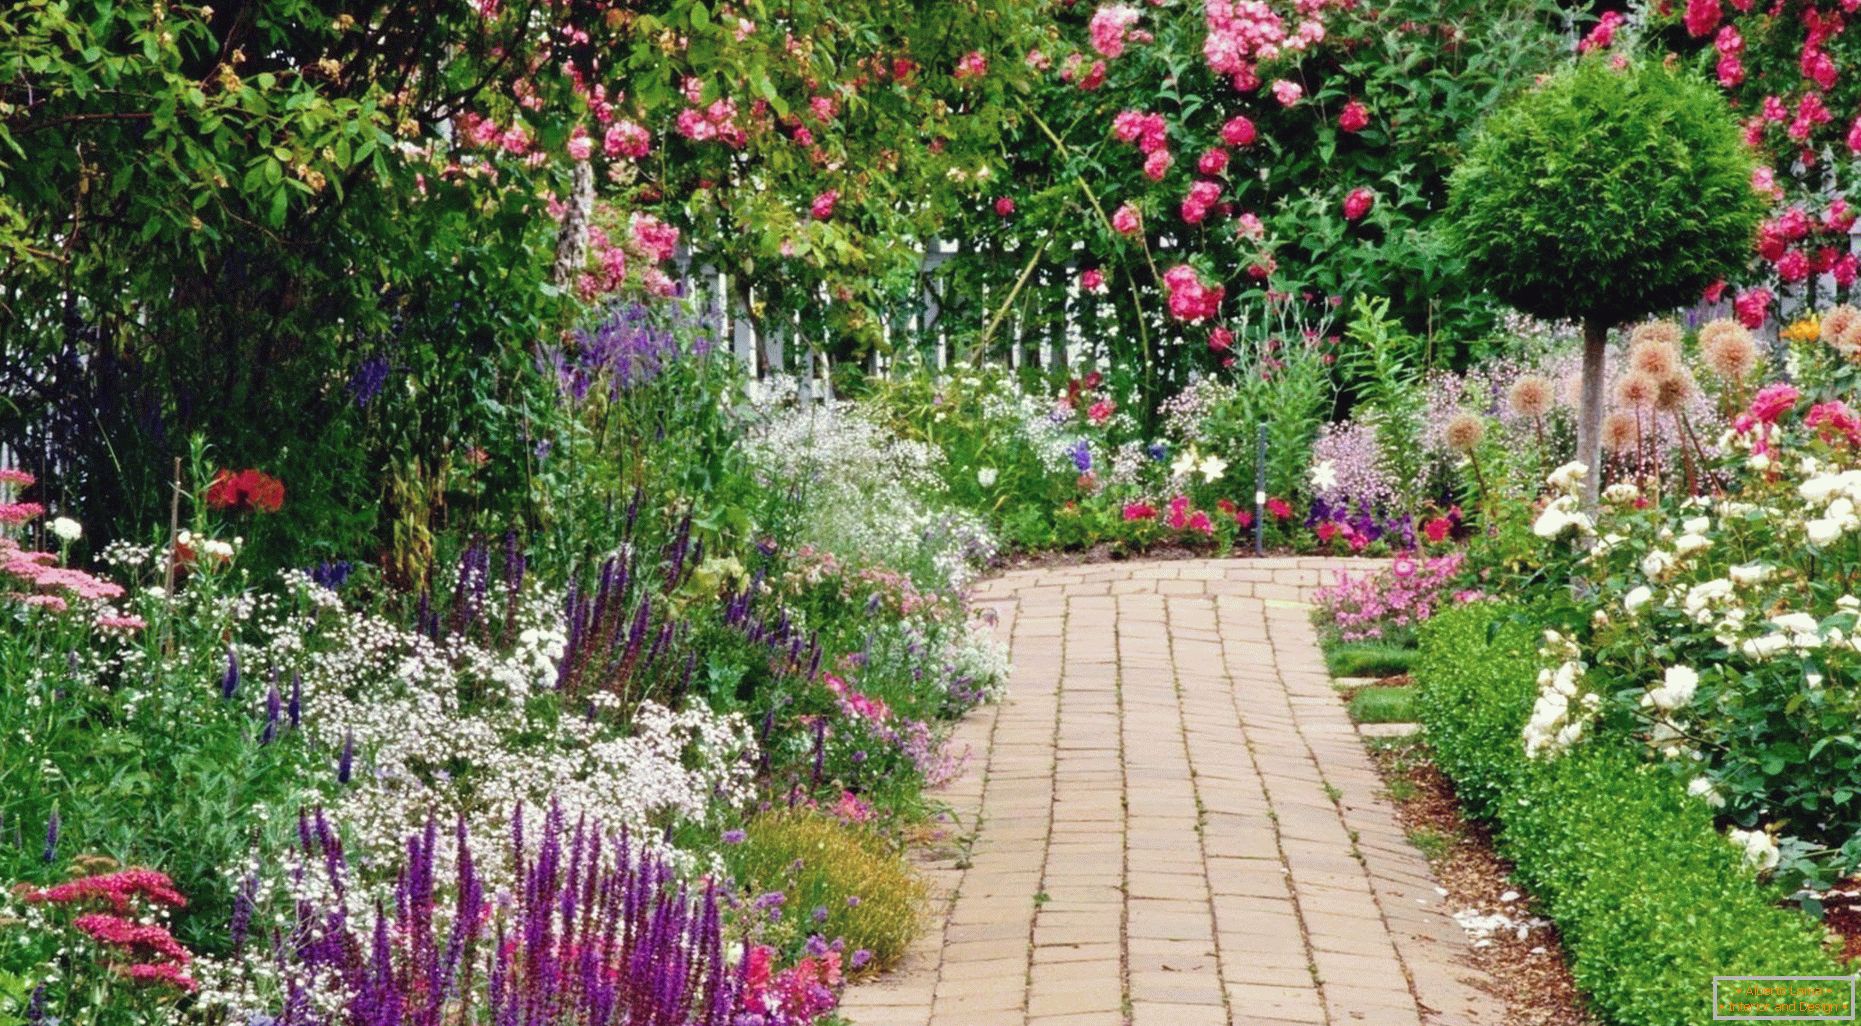 The path in the garden